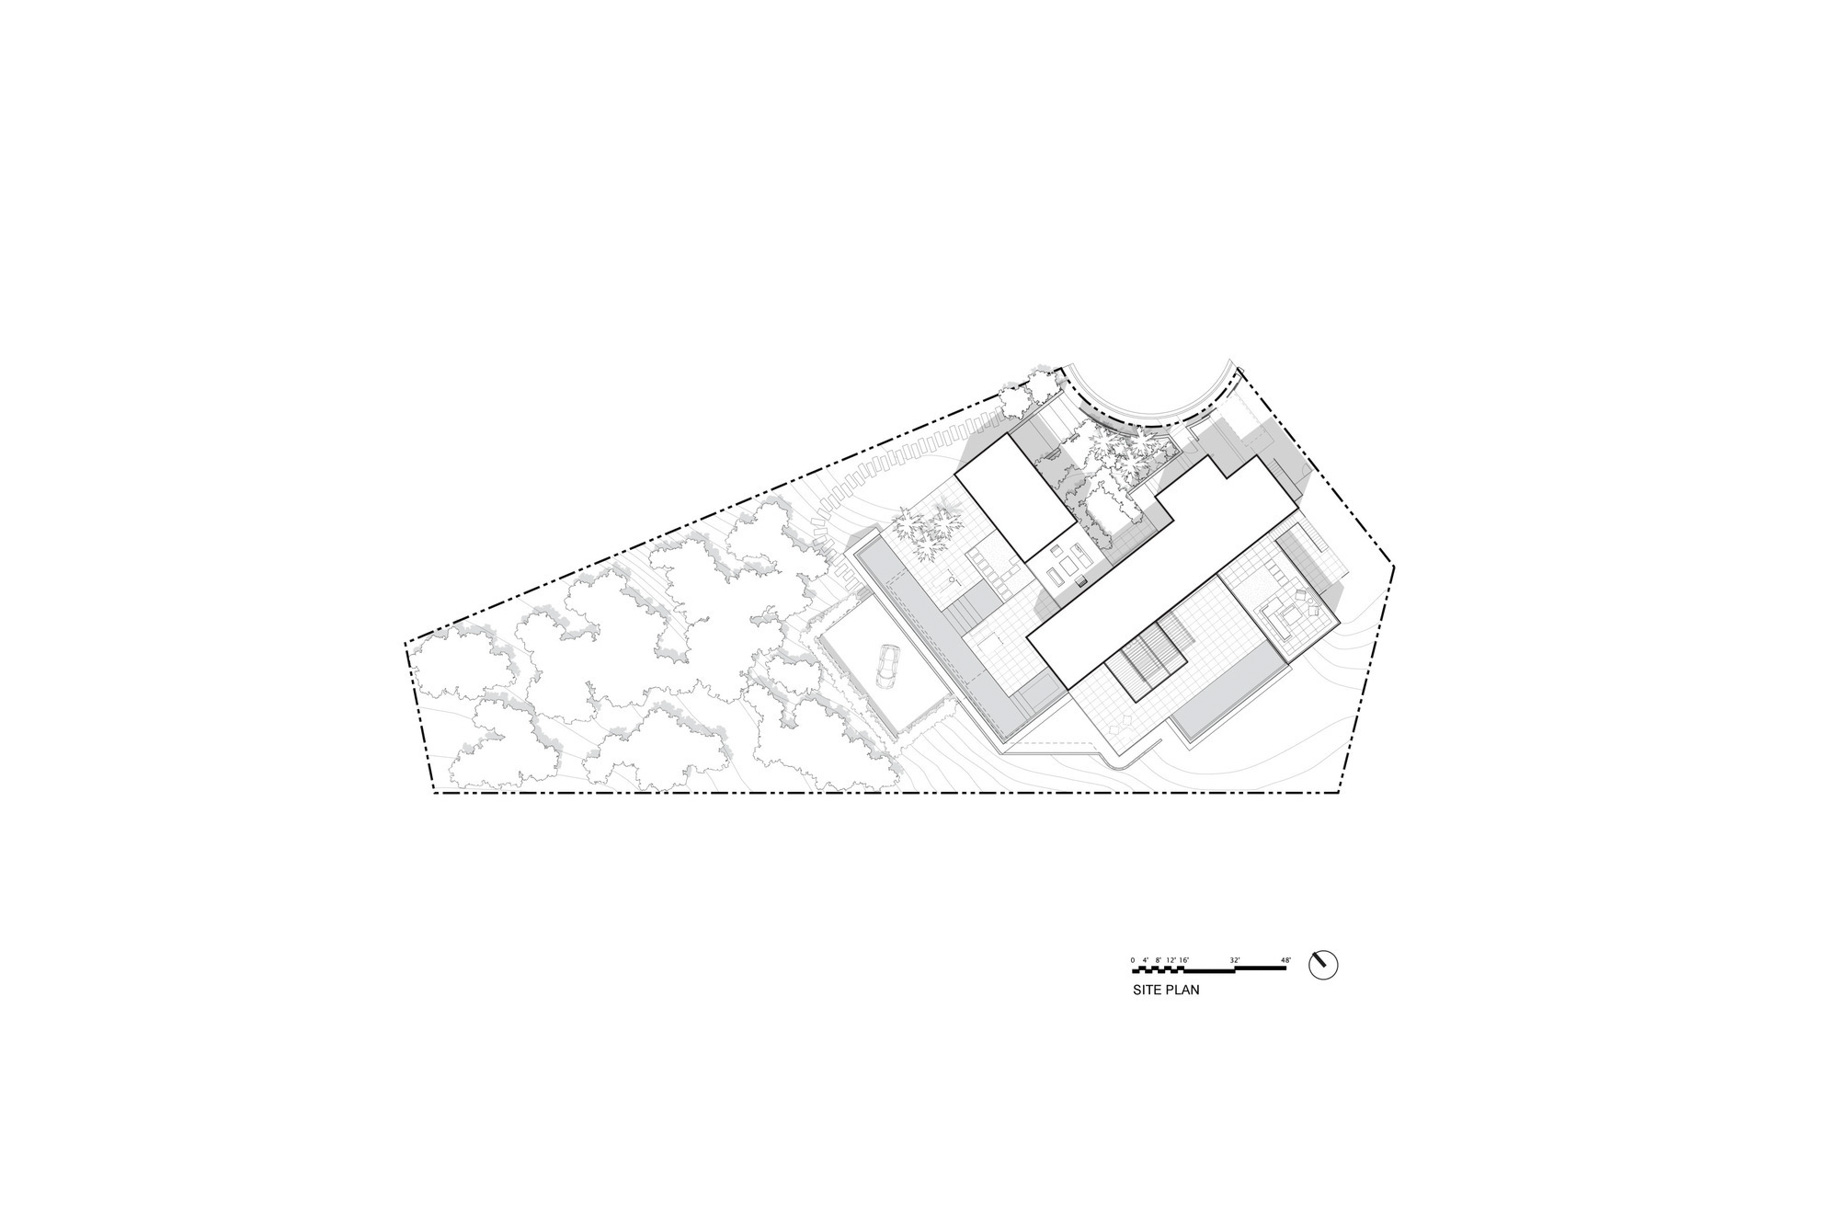 Site Plan – Collywood House – 1301 Collingwood Pl, Los Angeles, CA, USA – West Hollywood Modern Contemporary Home